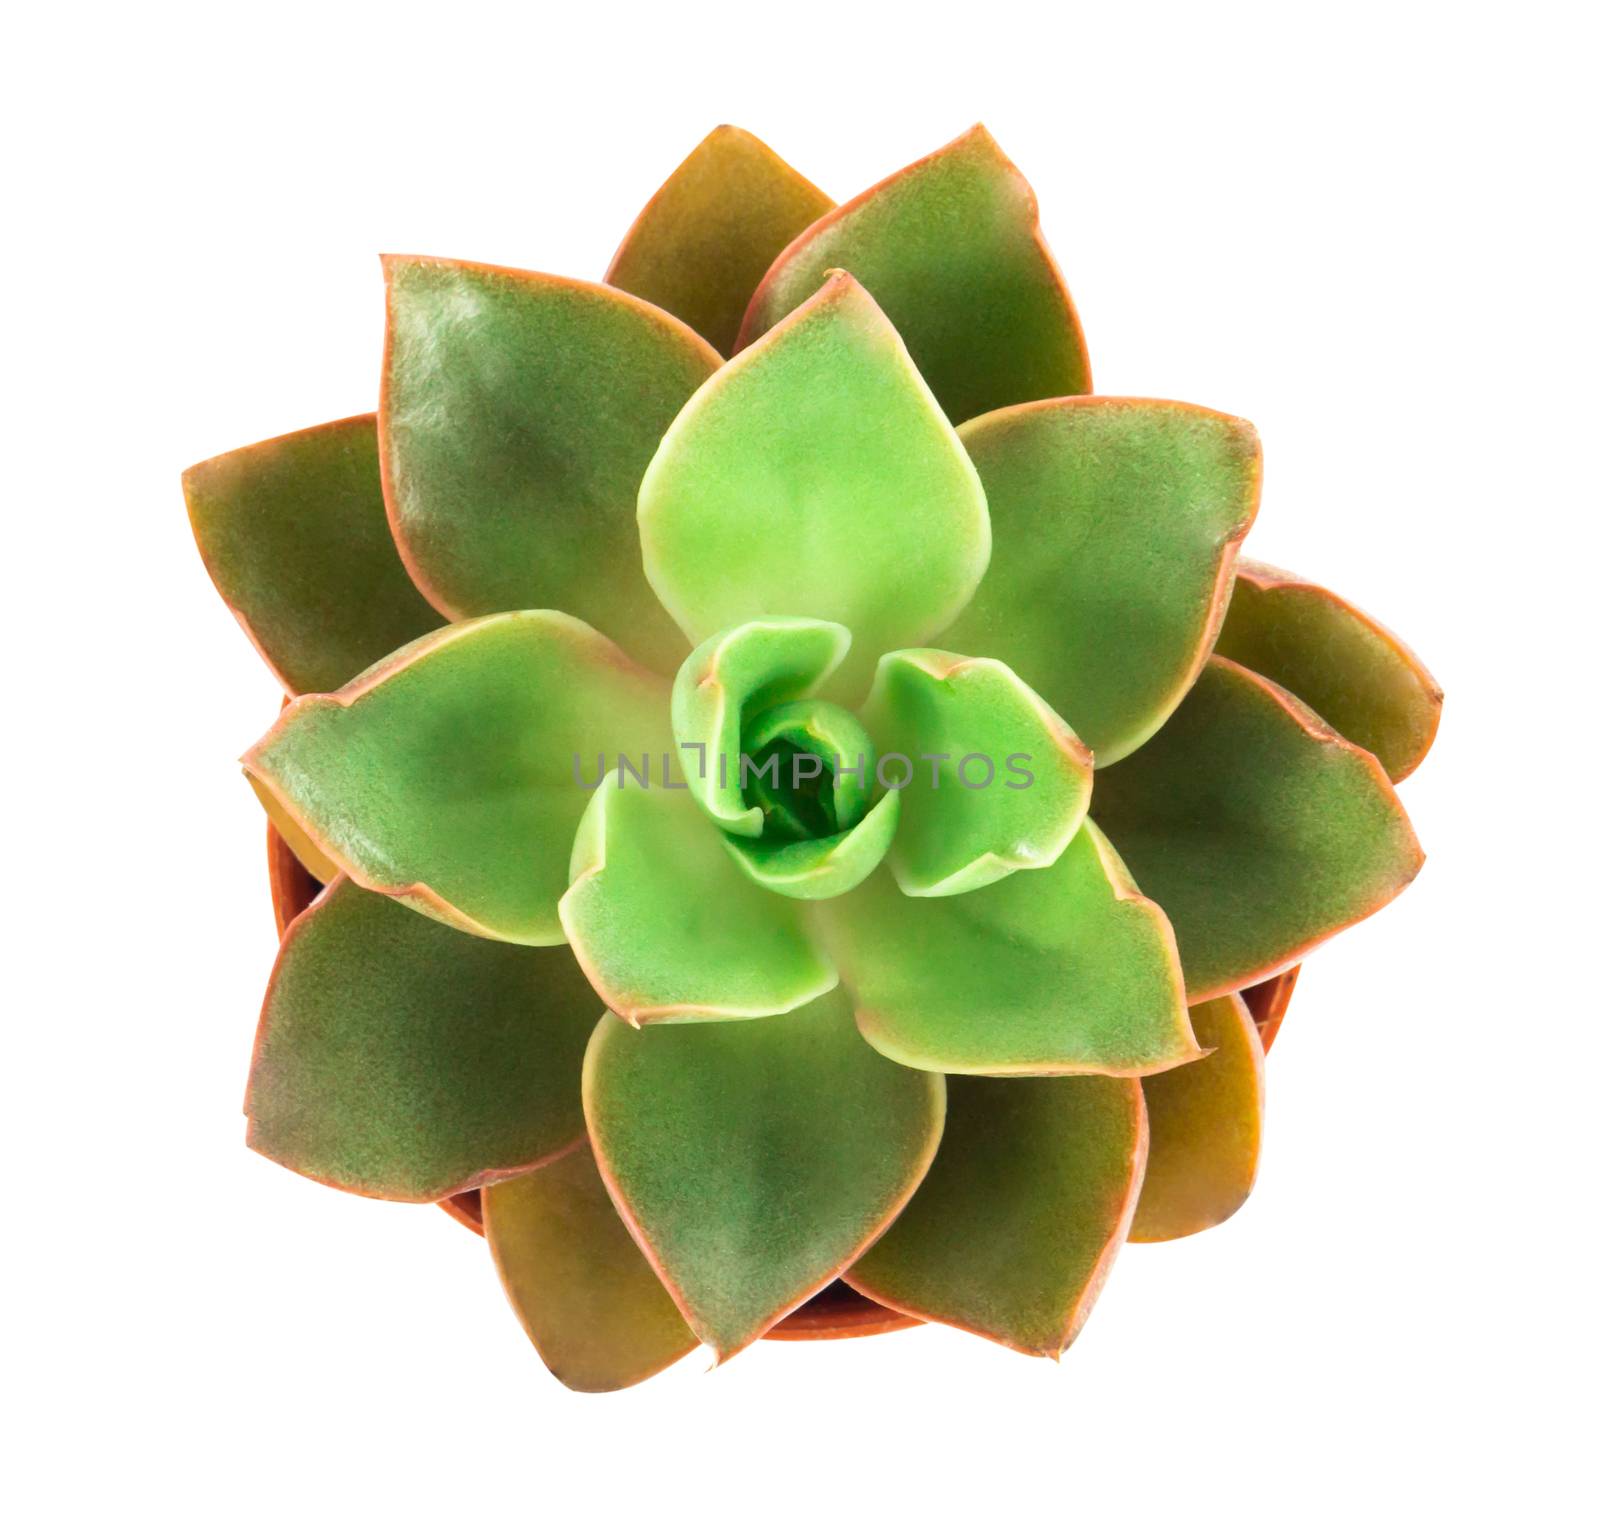 Top view green succulent cactus in pot isolate on white backgrou by pt.pongsak@gmail.com